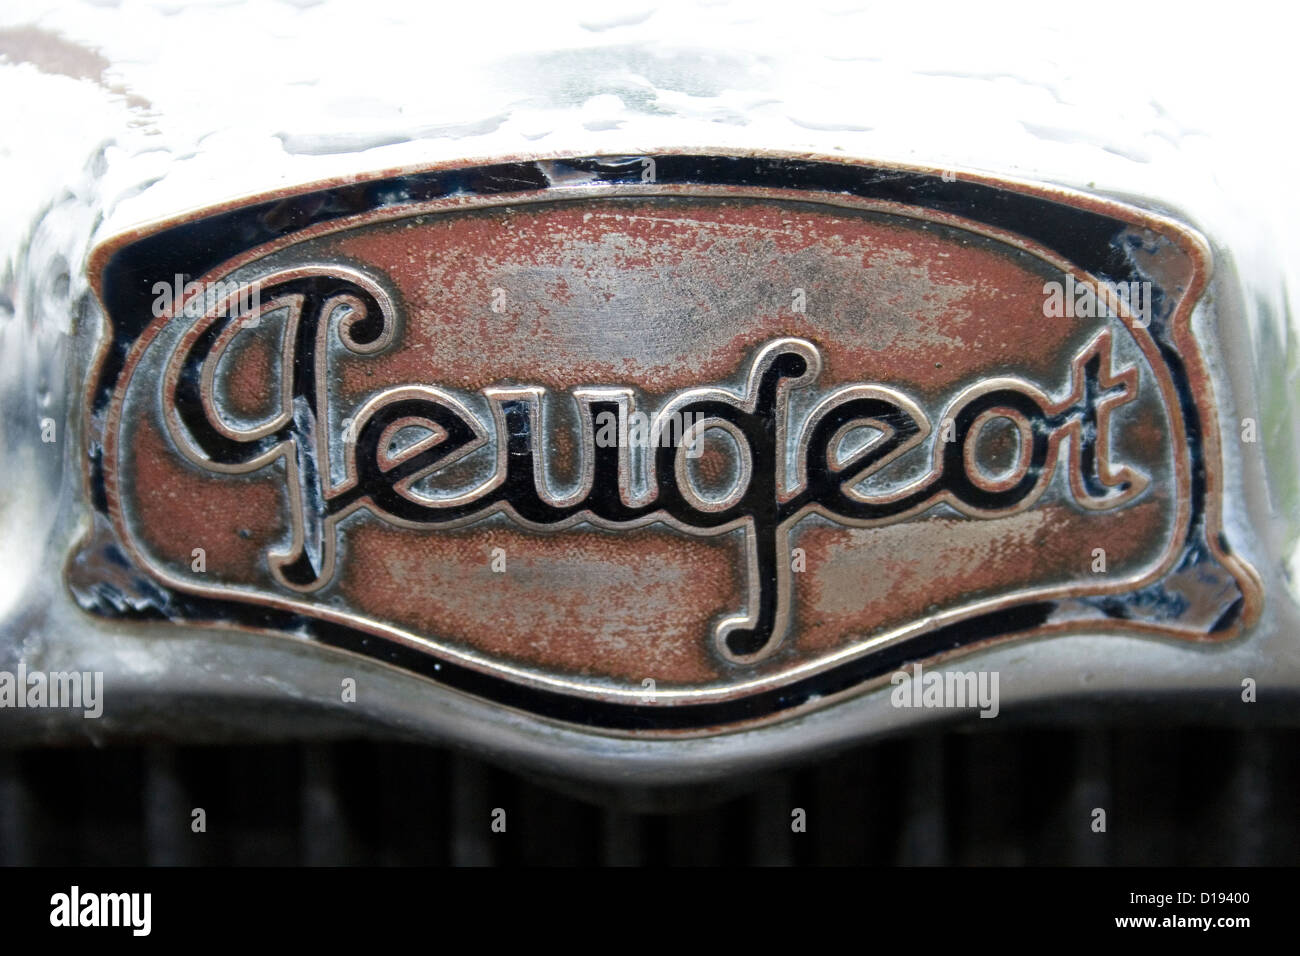 A vintage Peugeot badge on the front of an old Peugeot car at a car show. Stock Photo